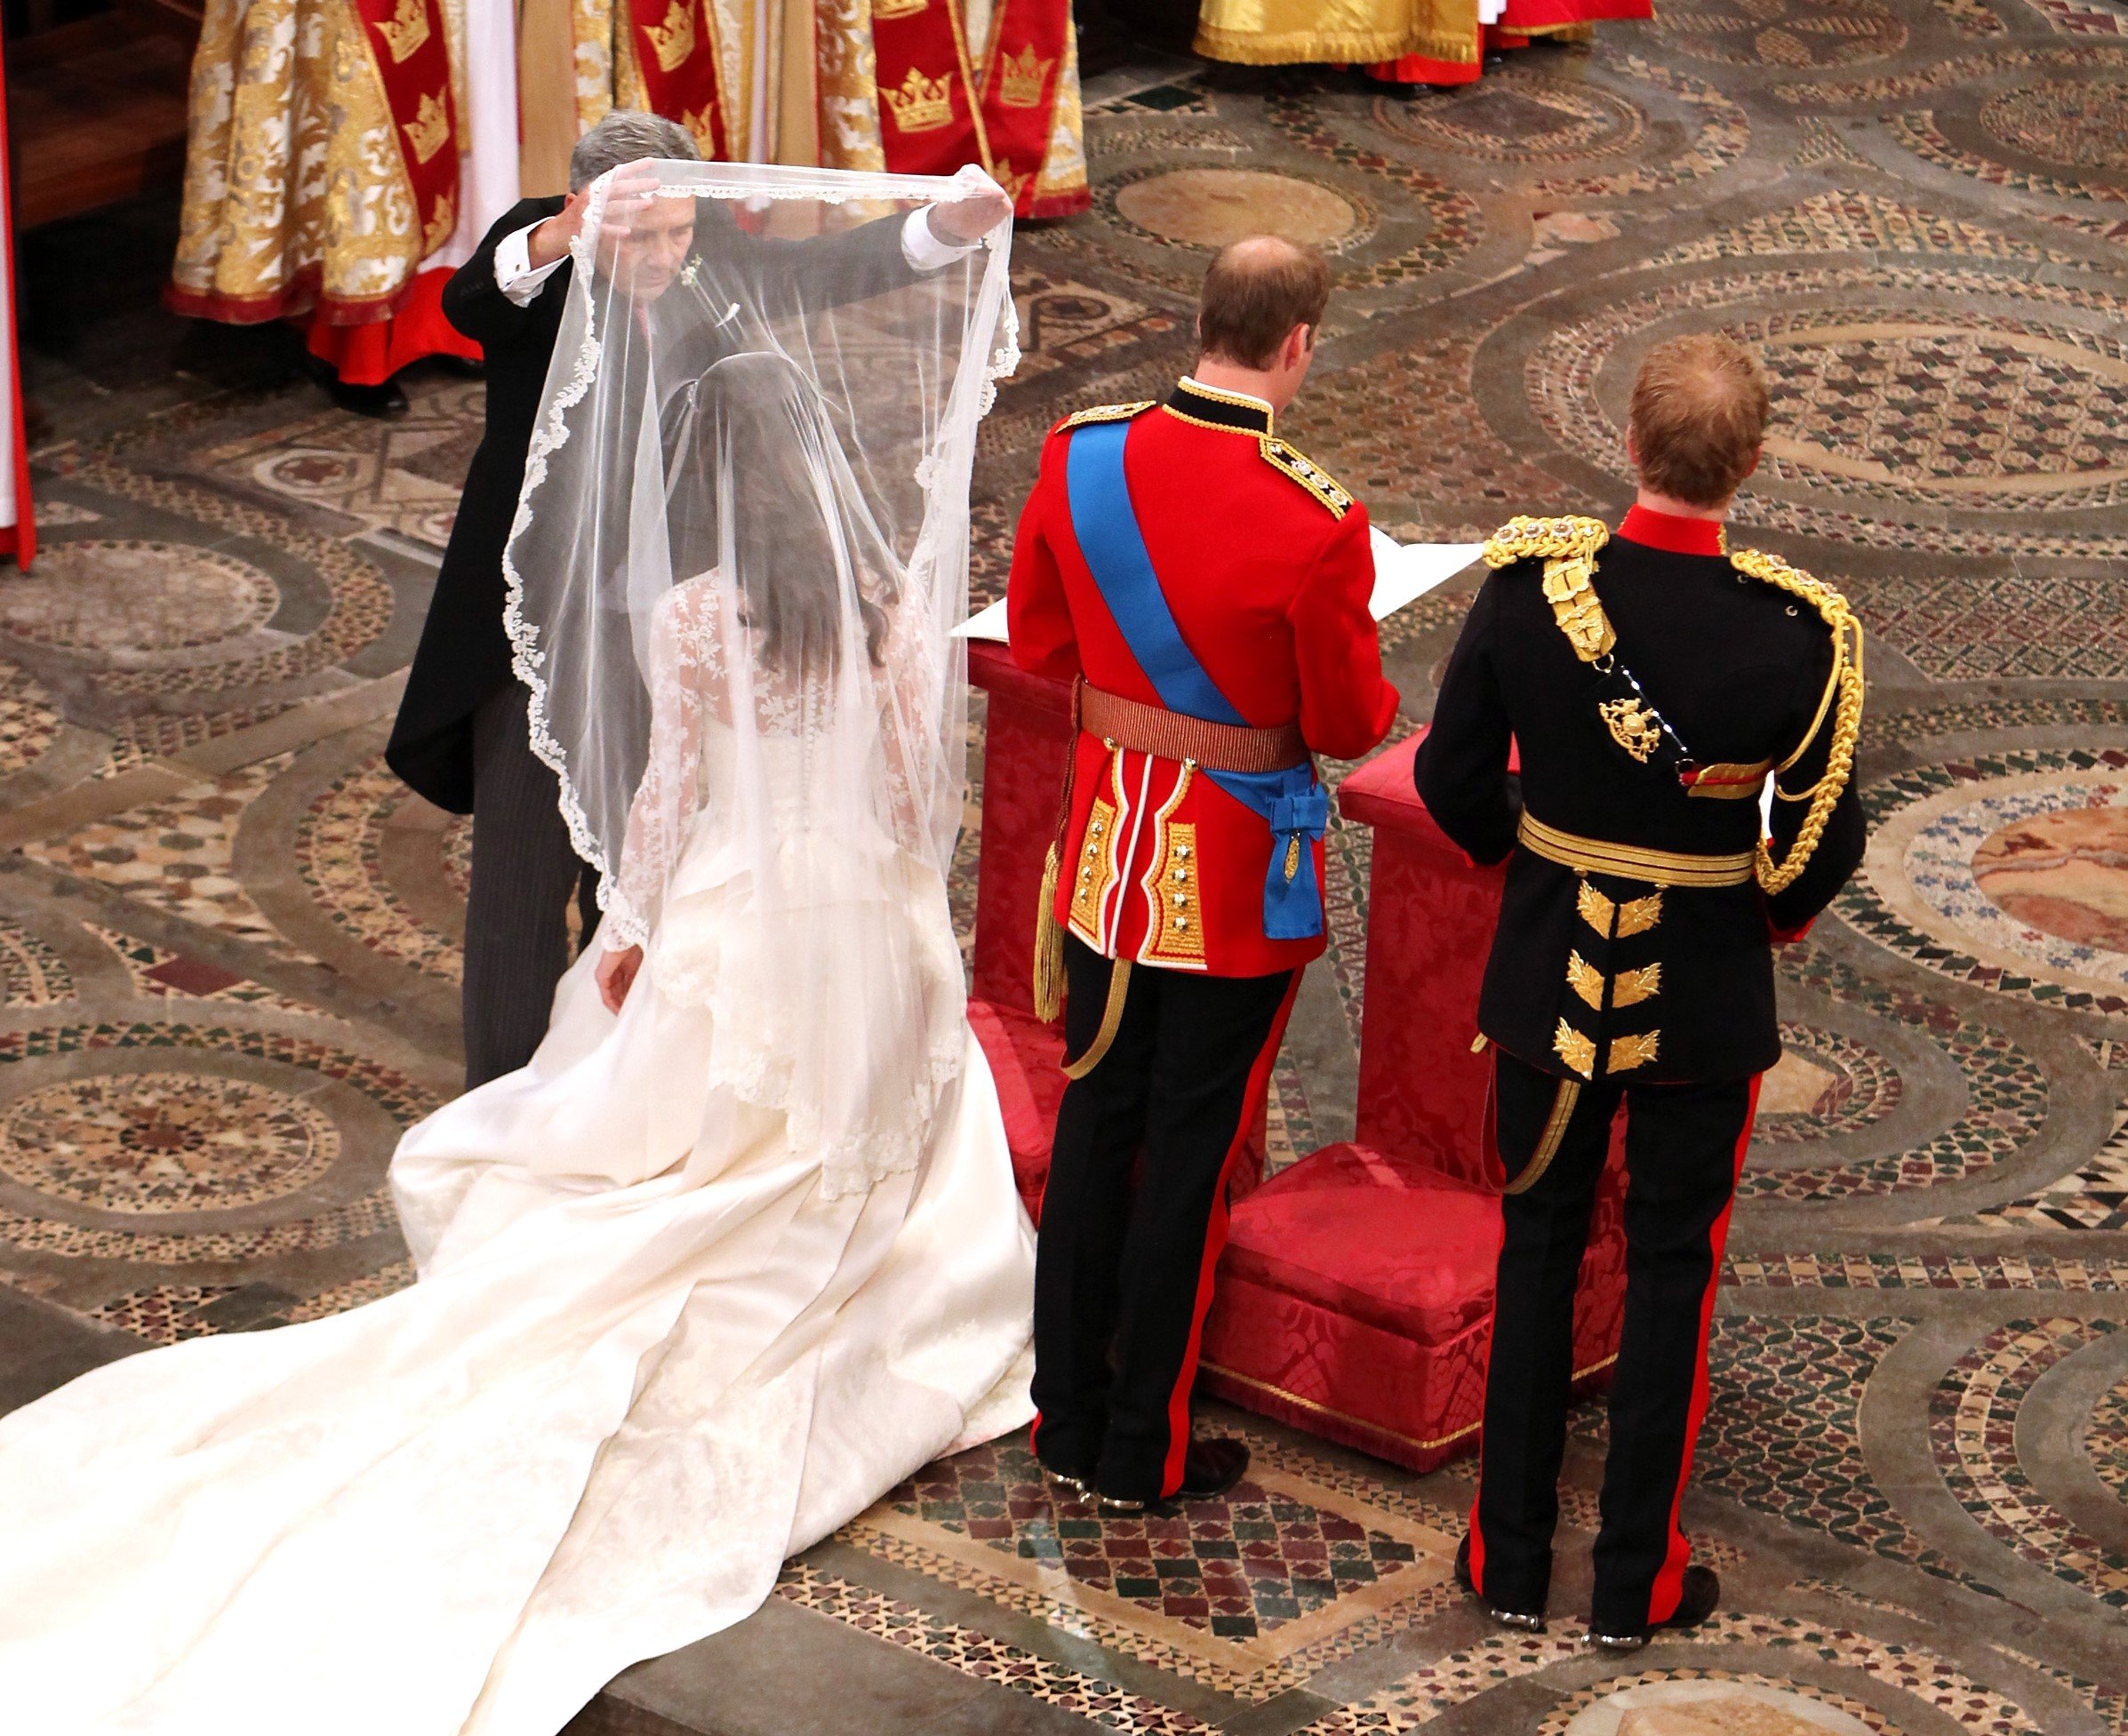 Michael Middleton lifts the bridal veil from Kate Middleton's face at the commencement of her wedding ceremony to Prince William as Prince Harry looks on